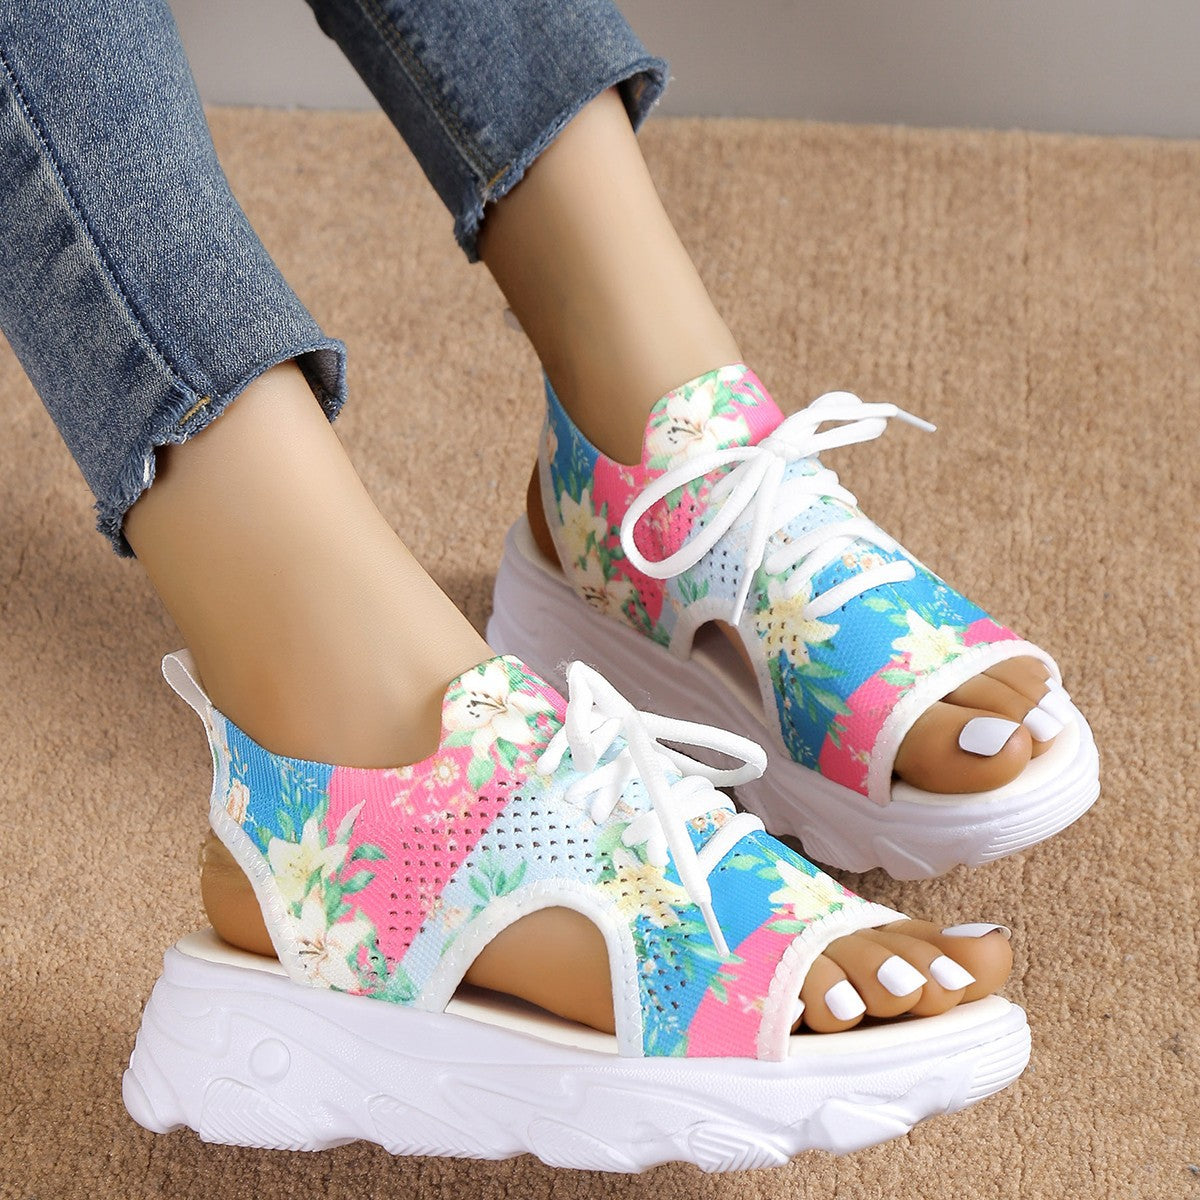 sandals  | Print Lace-up Sports Sandals Summer Peep Toe Casual Mesh Shoes | Pink Blue |  35.| thecurvestory.myshopify.com